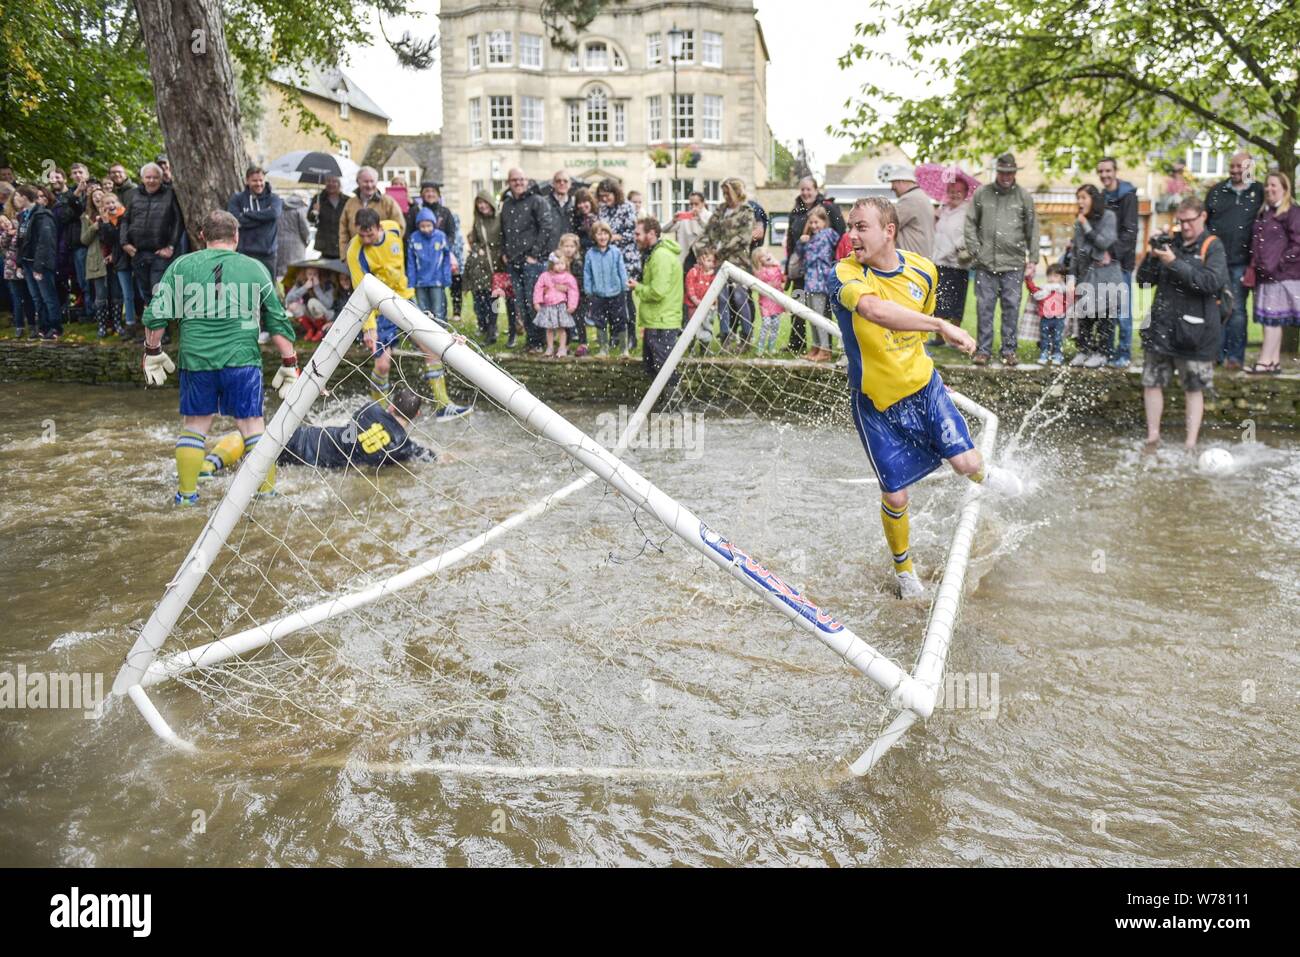 A British tradition, river football at Bourton-on-the-Water, Cotswolds August 2015. The match is held every August Bank Holiday. The game is a five-a-side football match, but in the River Windrush that runs through the town. Residents and visitors line the waters edge and bridges to get the best seats, but risk getting a soaking if the action comes too close. In 2015 British celebrithy, Griff Rhys Jones, took part during the filming for A Great British Adventure. Credit: Michael Scott/Alamy Live News Stock Photo